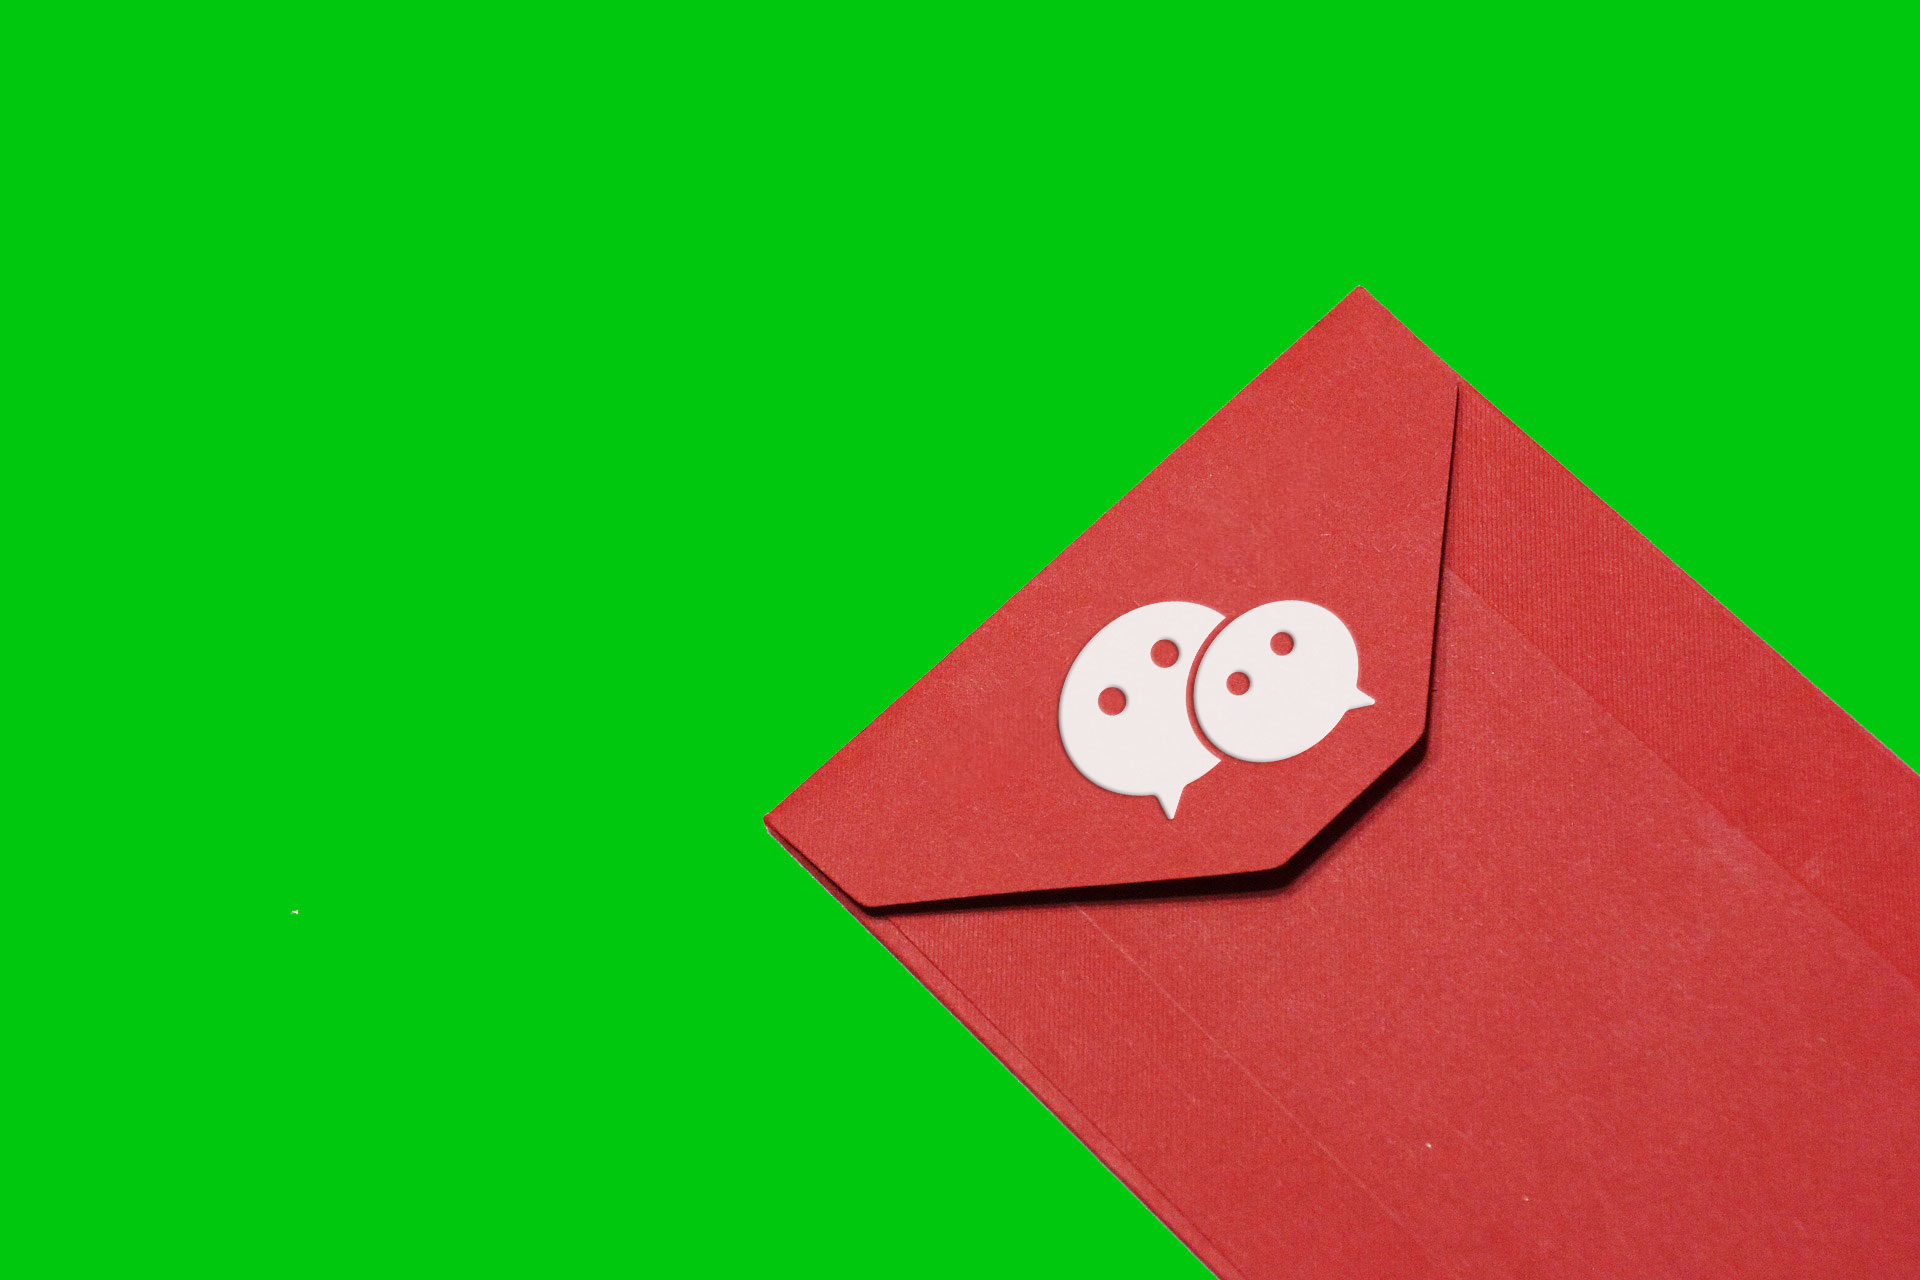 An image of a red envelope with the wechat loogo on it.